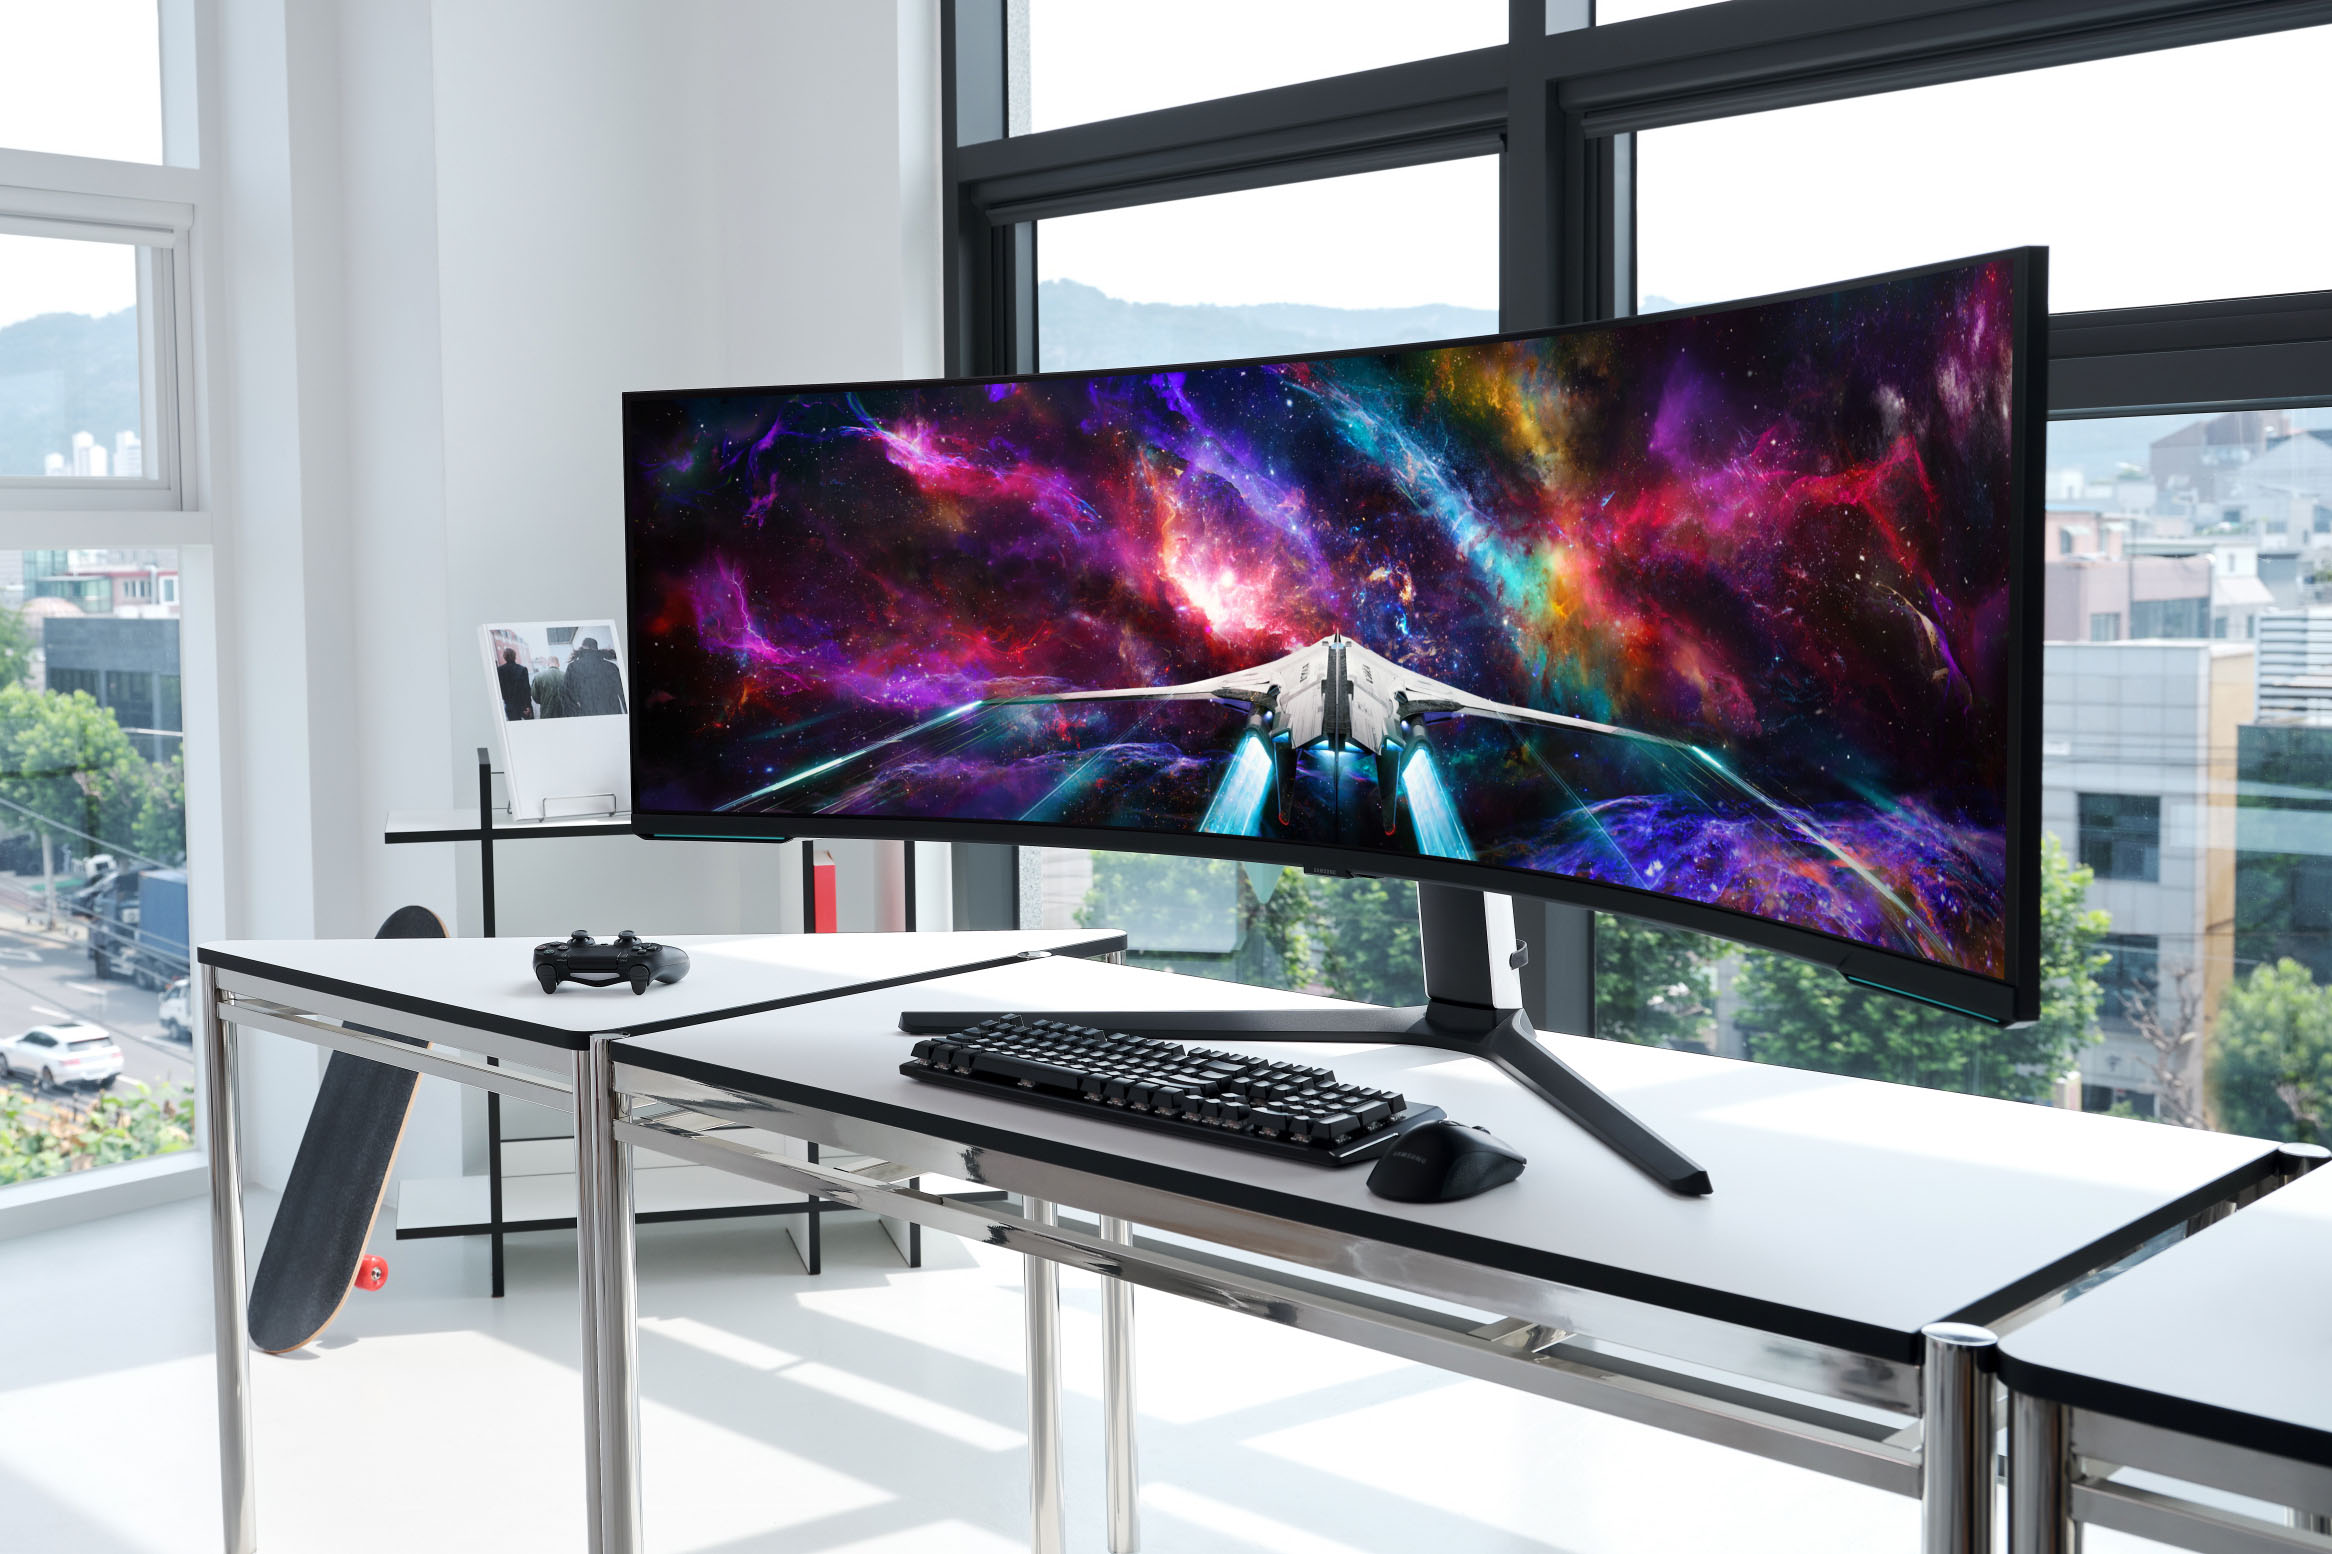 Samsung reveals world's largest gaming monitor, priced at $3,500